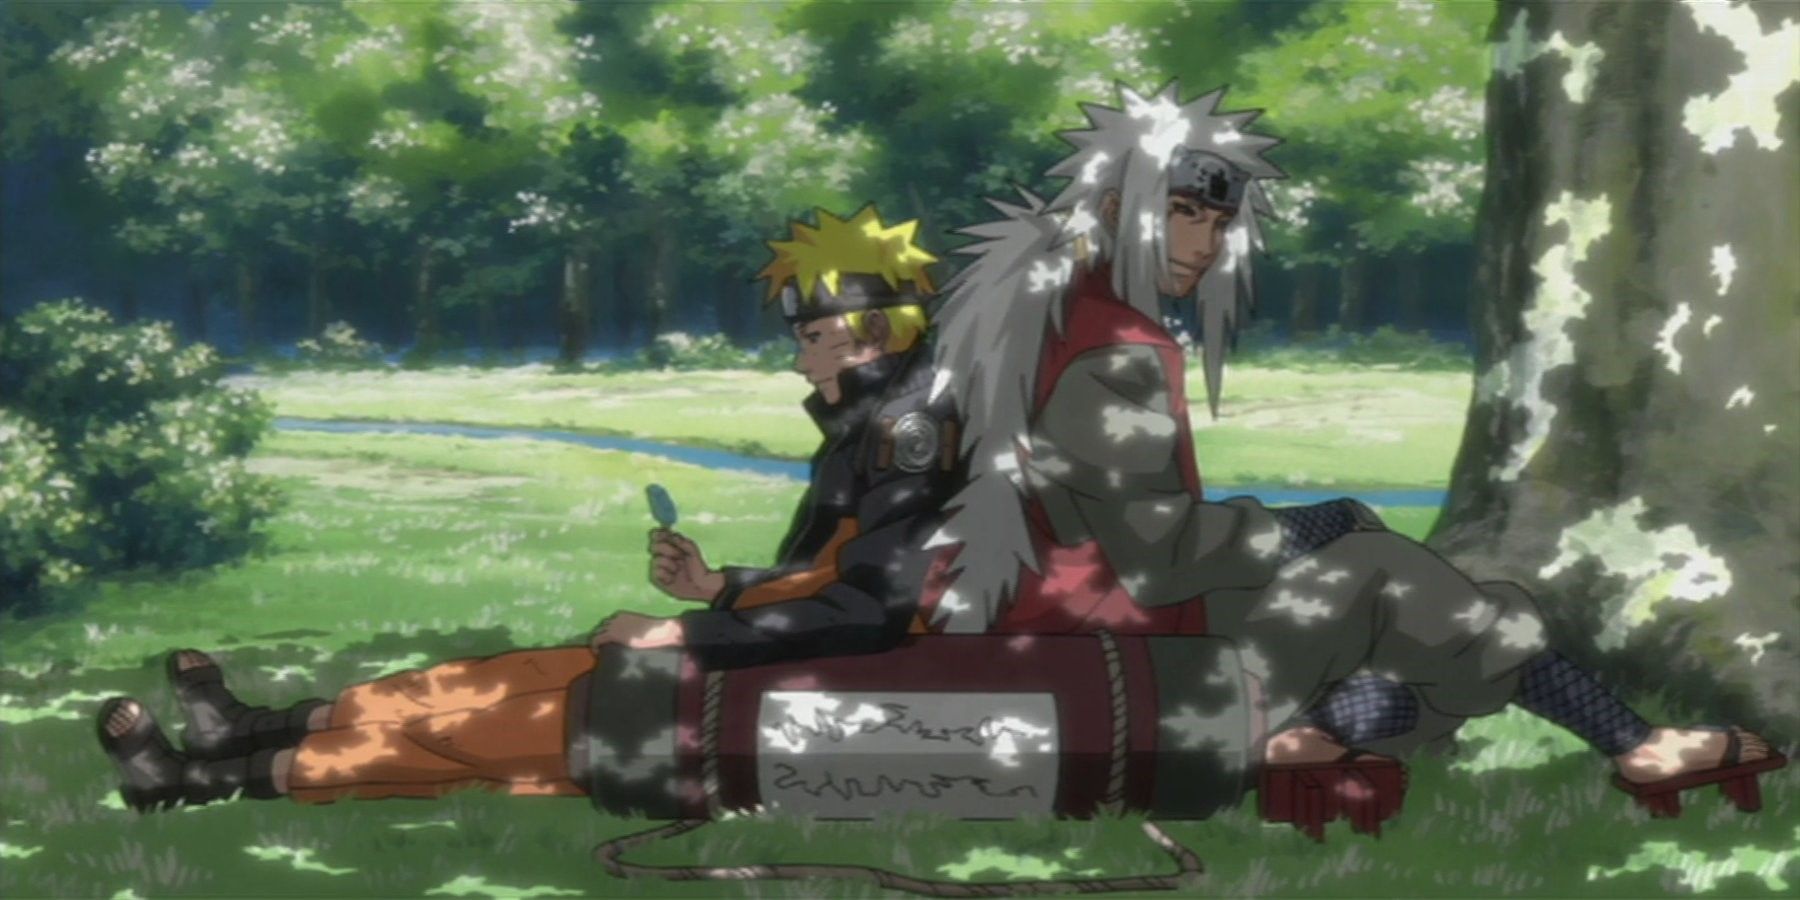 Screenshot from Naruto Shippuden anime shows Naruto and Jiraiya resting under the shad of a tree back to back. Naruto is holding onto a leaf as he begins to doze. It would be the last time the two would be able to relax together.